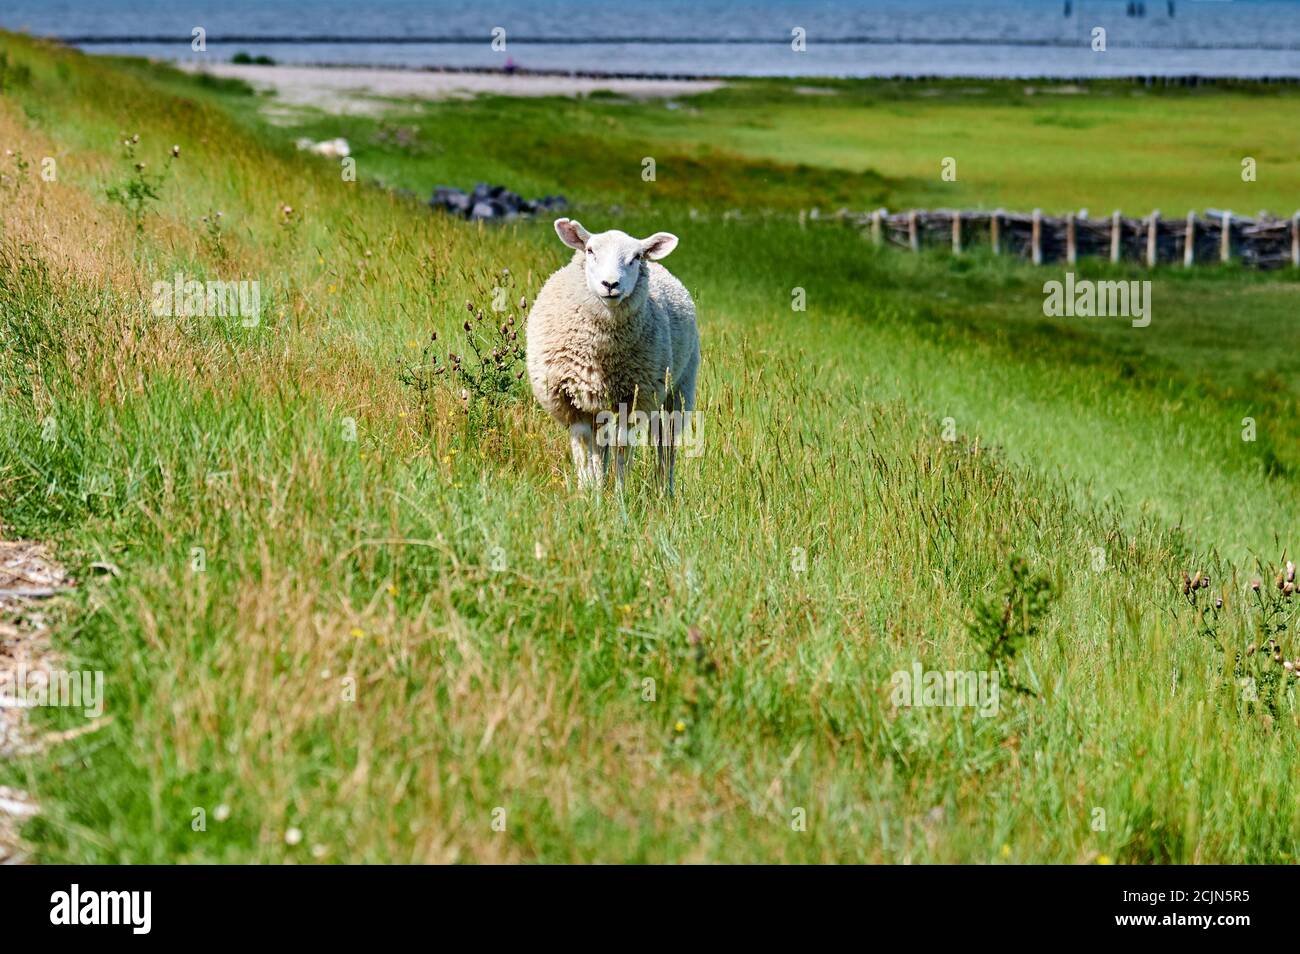 A sheep looks intently at the camera Stock Photo